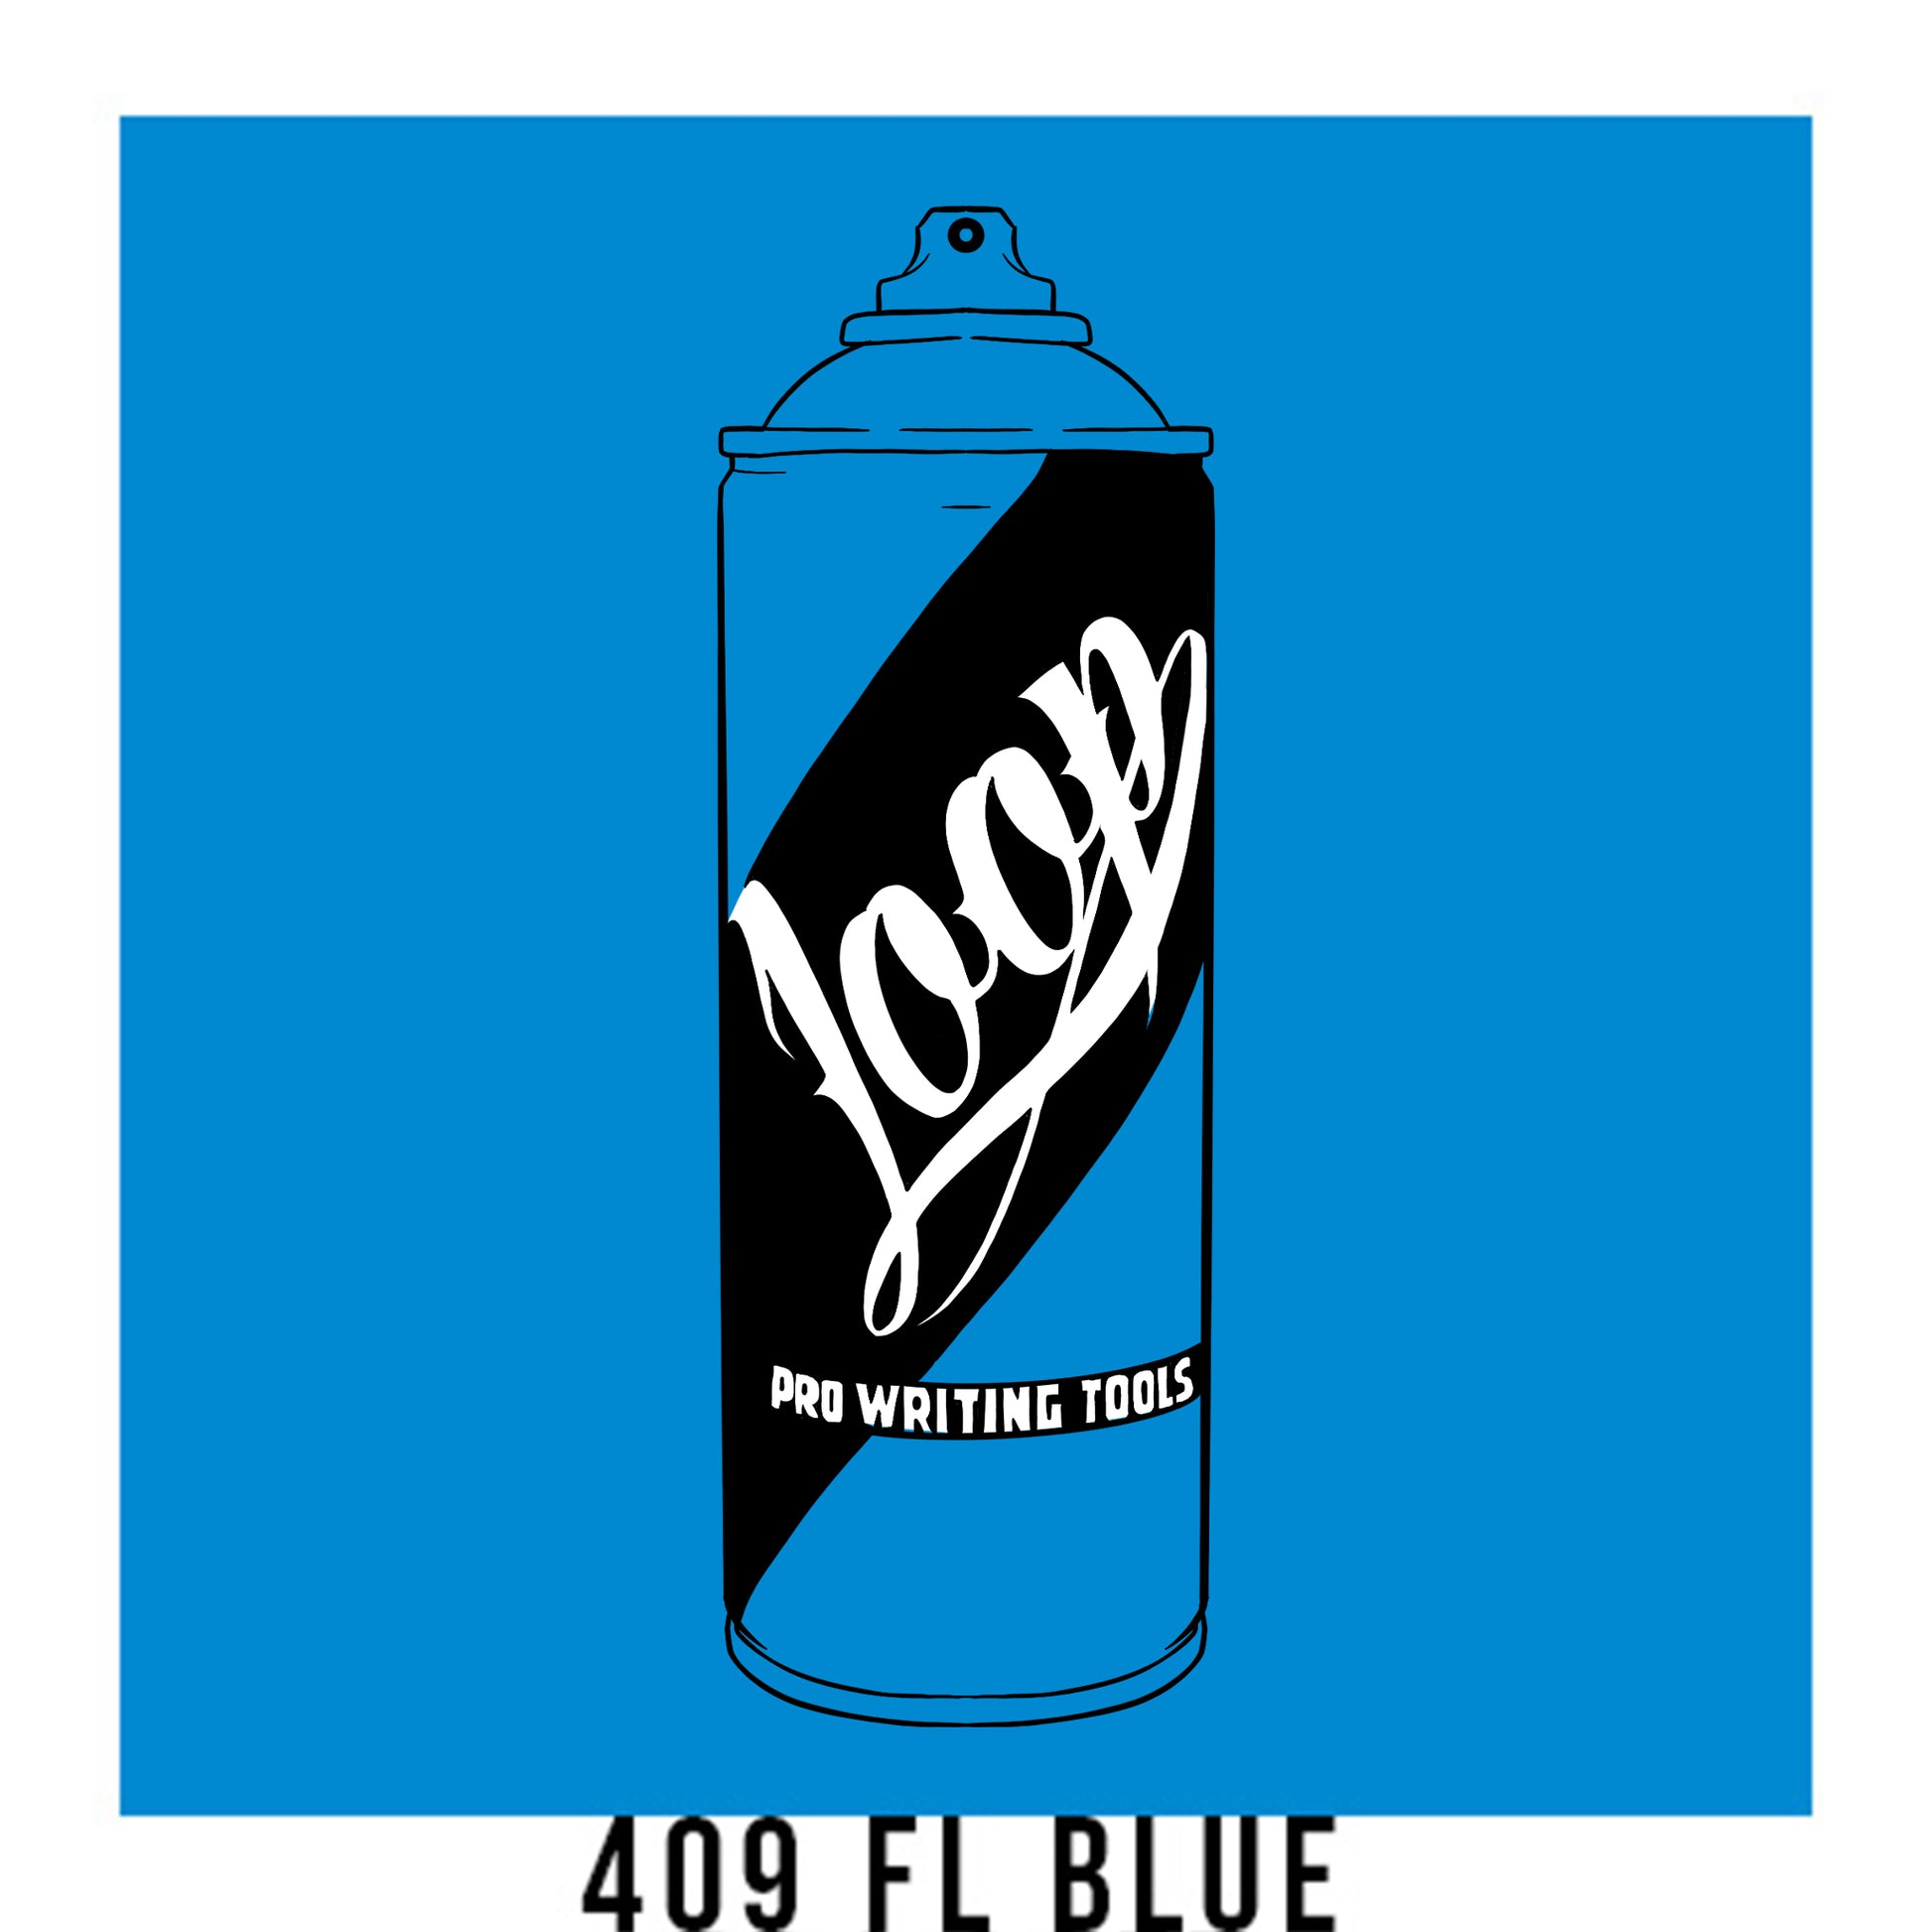 A black outline drawing of a electric blue spray paint can with the word "Loop" written on the face in script. The background is a color swatch of the same electric blue  with a white border with the words "409 FL Blue" at the bottom.